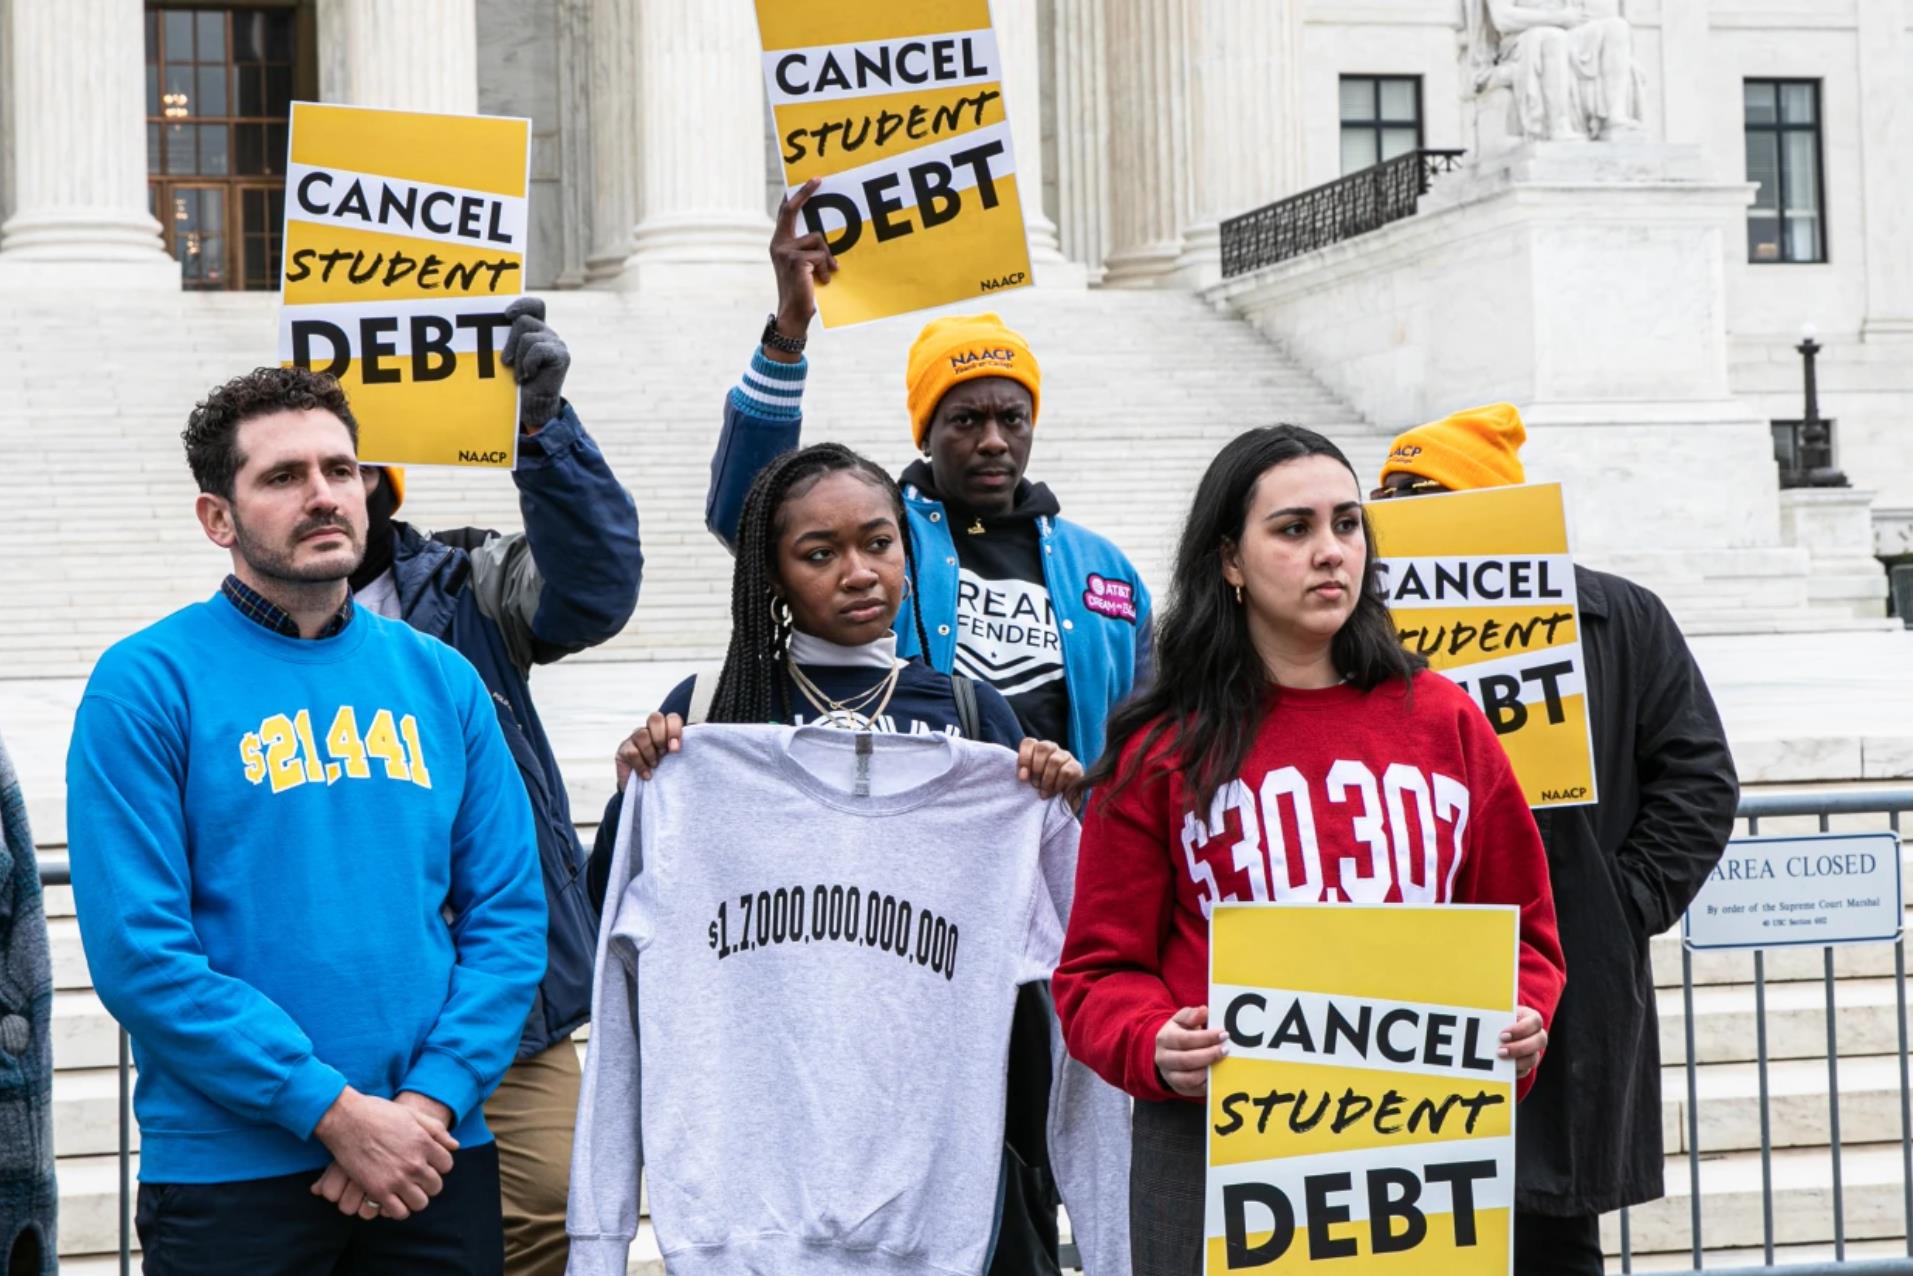 GOP states trying to stop Biden’s student loan forgiveness push their own relief programs